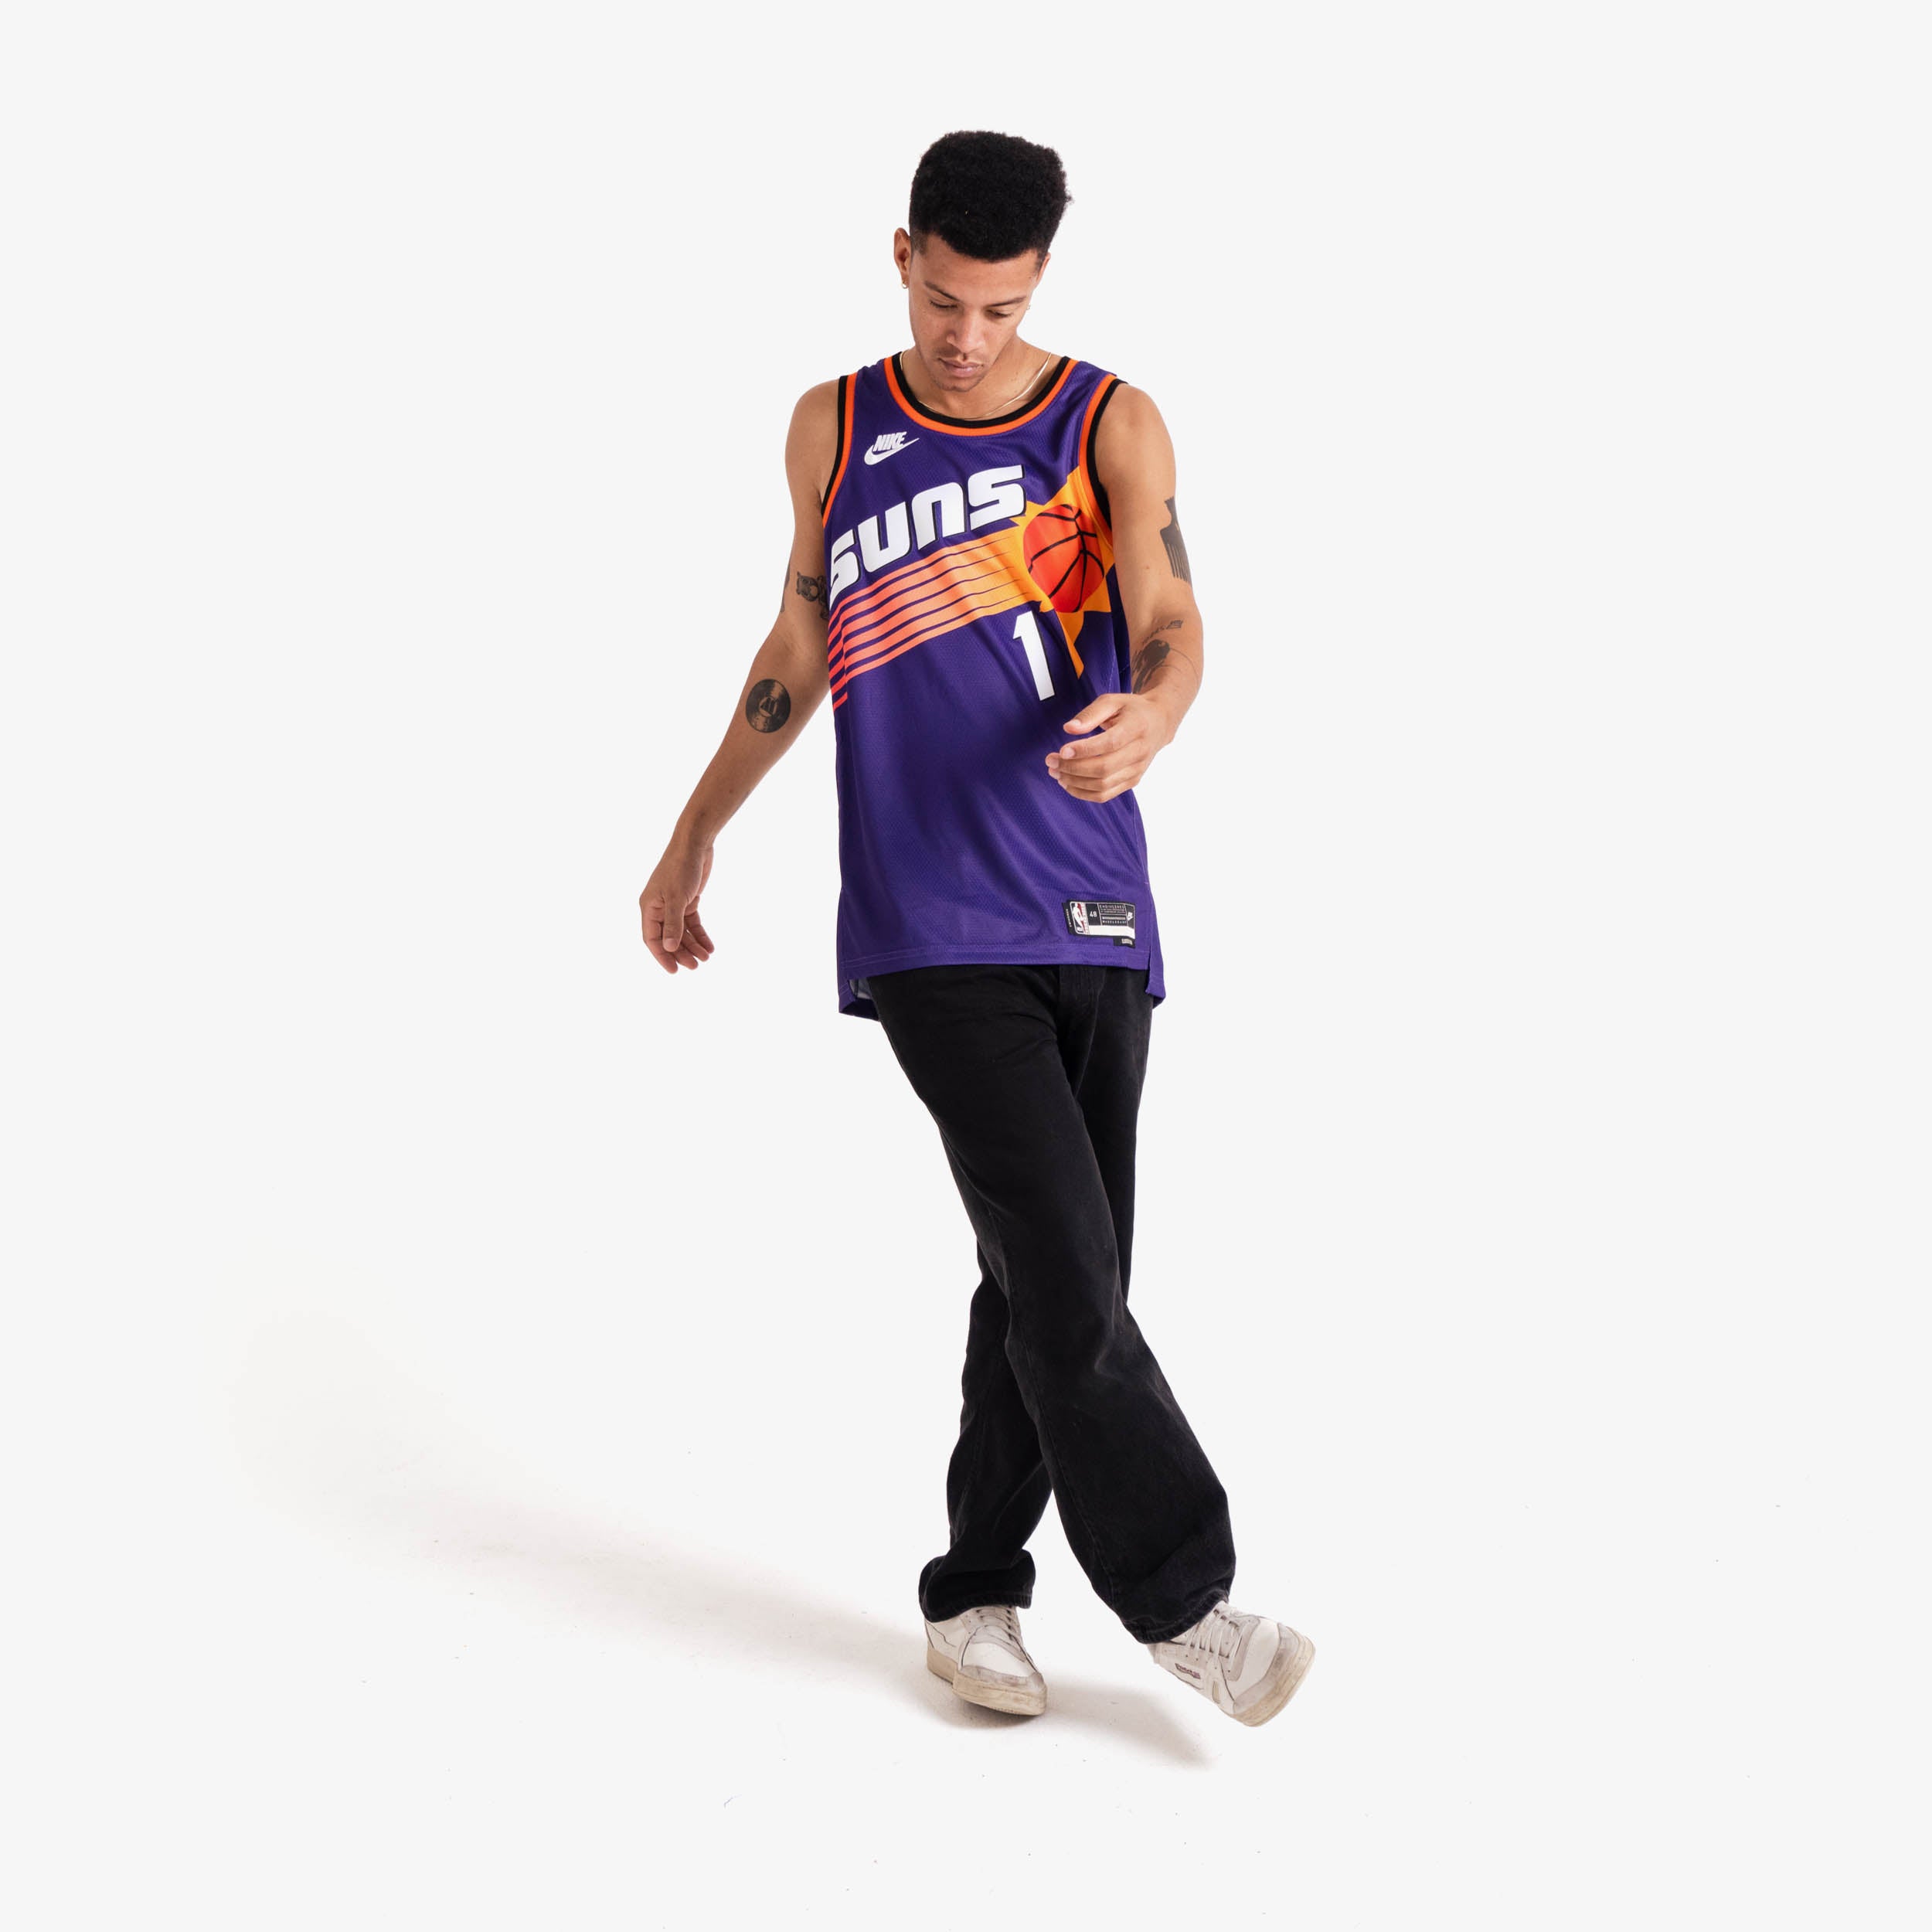 BASKETBALL JERSEY WORLD - 🌄 The first of many Basketball Jersey World  exclusives! ☄️ DROP 1: 2020-21 Devin Booker City Edition Youth Jerseys.  Available now:  🌵 #WeAreTheValley